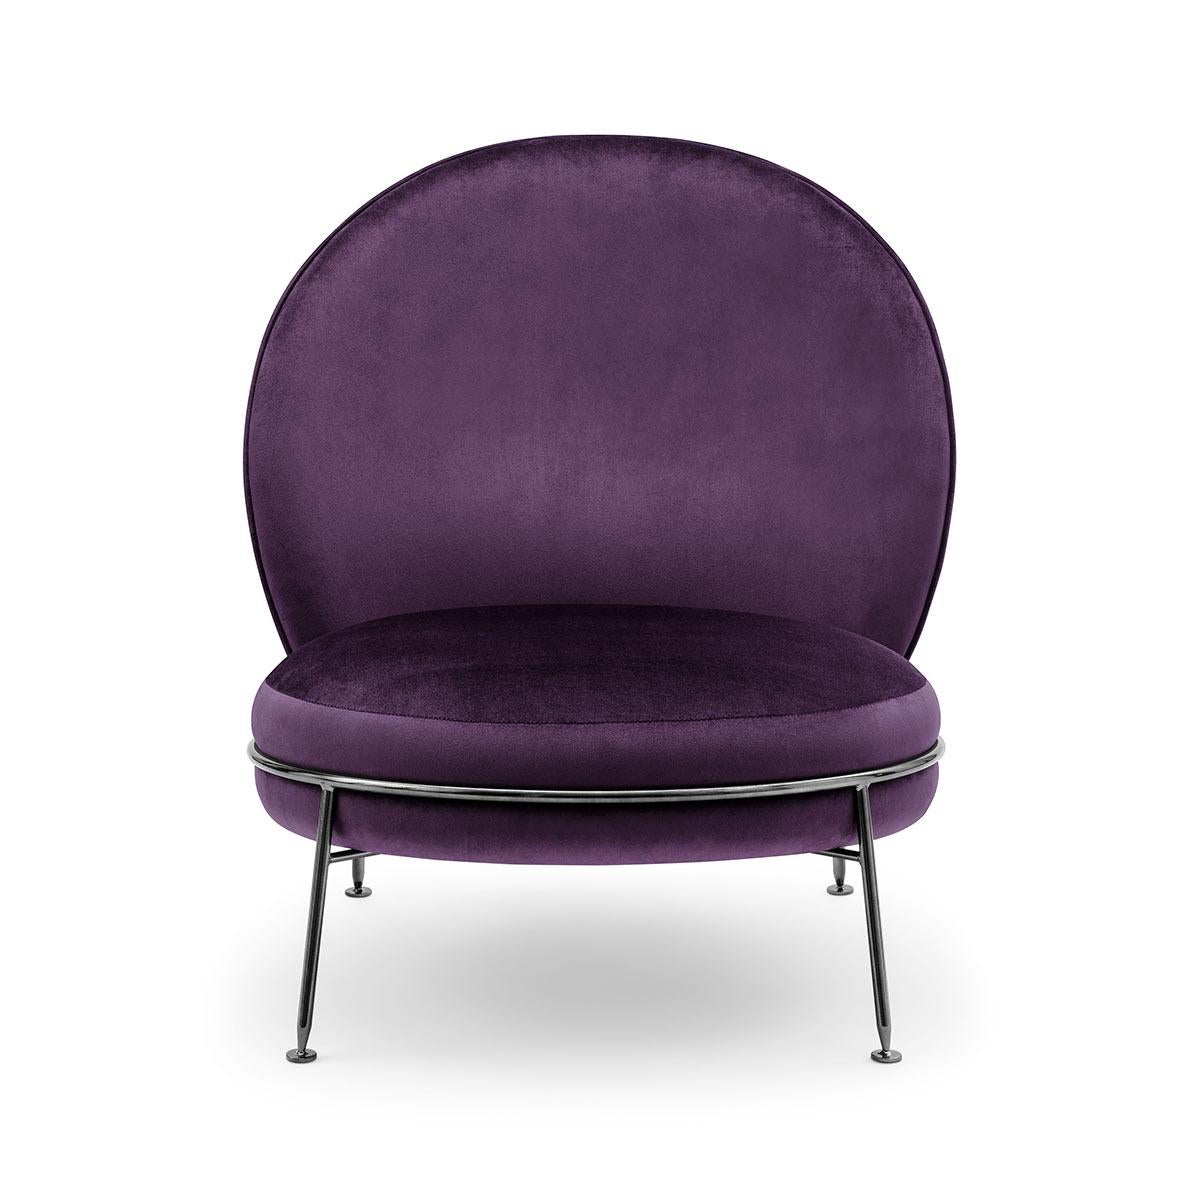 Other Beautiful Armchair Amaretto Collection Available in Different Colors For Sale